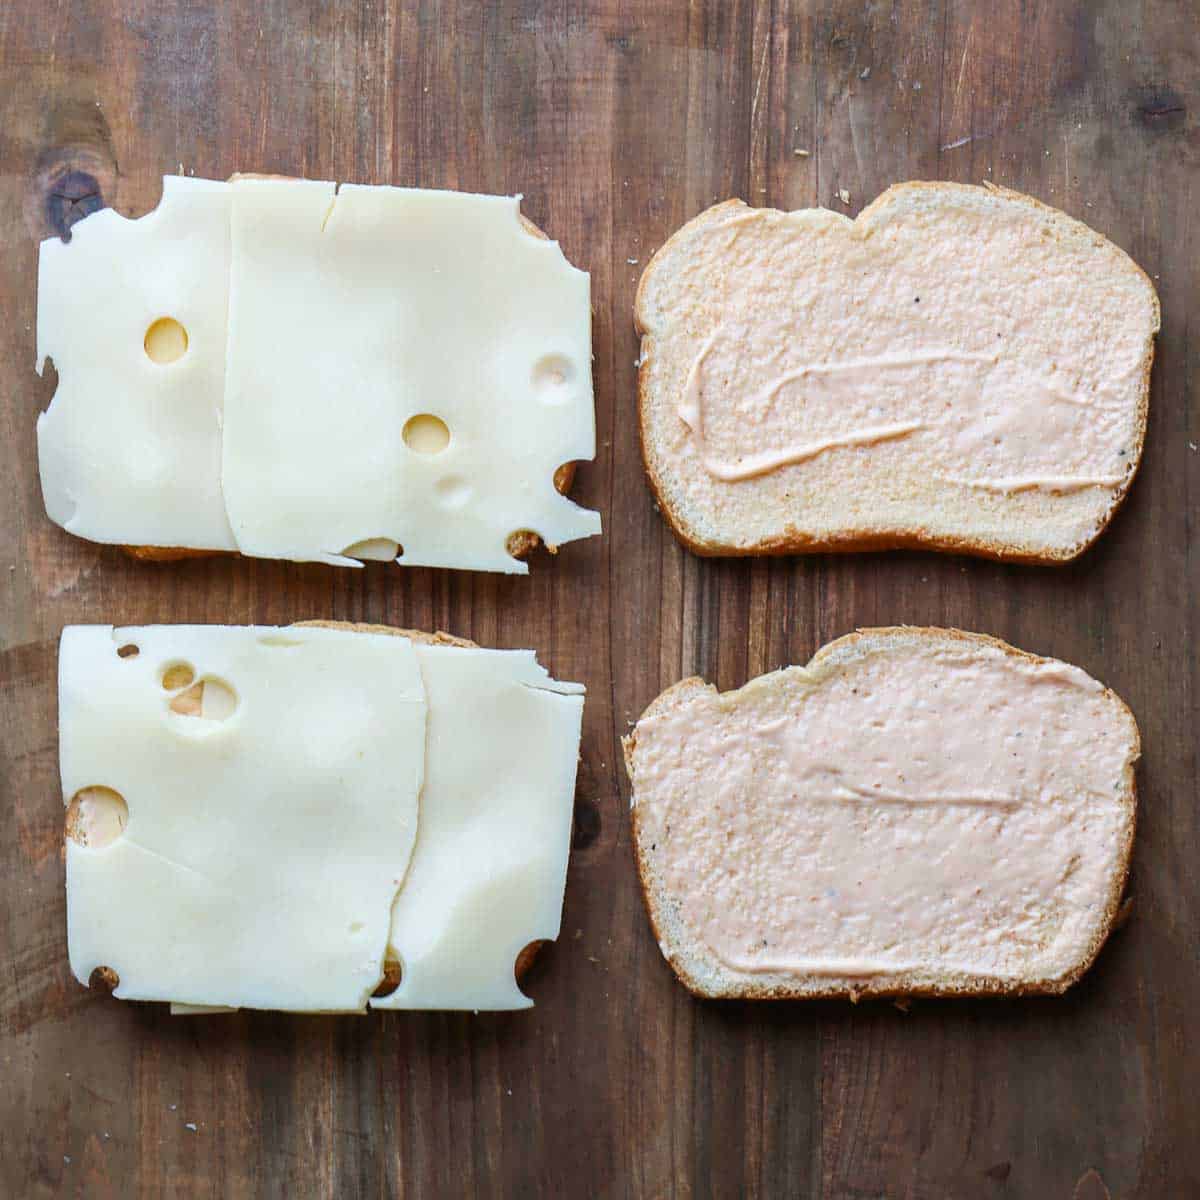 Four slices of bread laid out. Two slices of bread have a thin layer of sauce, while the other two slices have Swiss cheese.